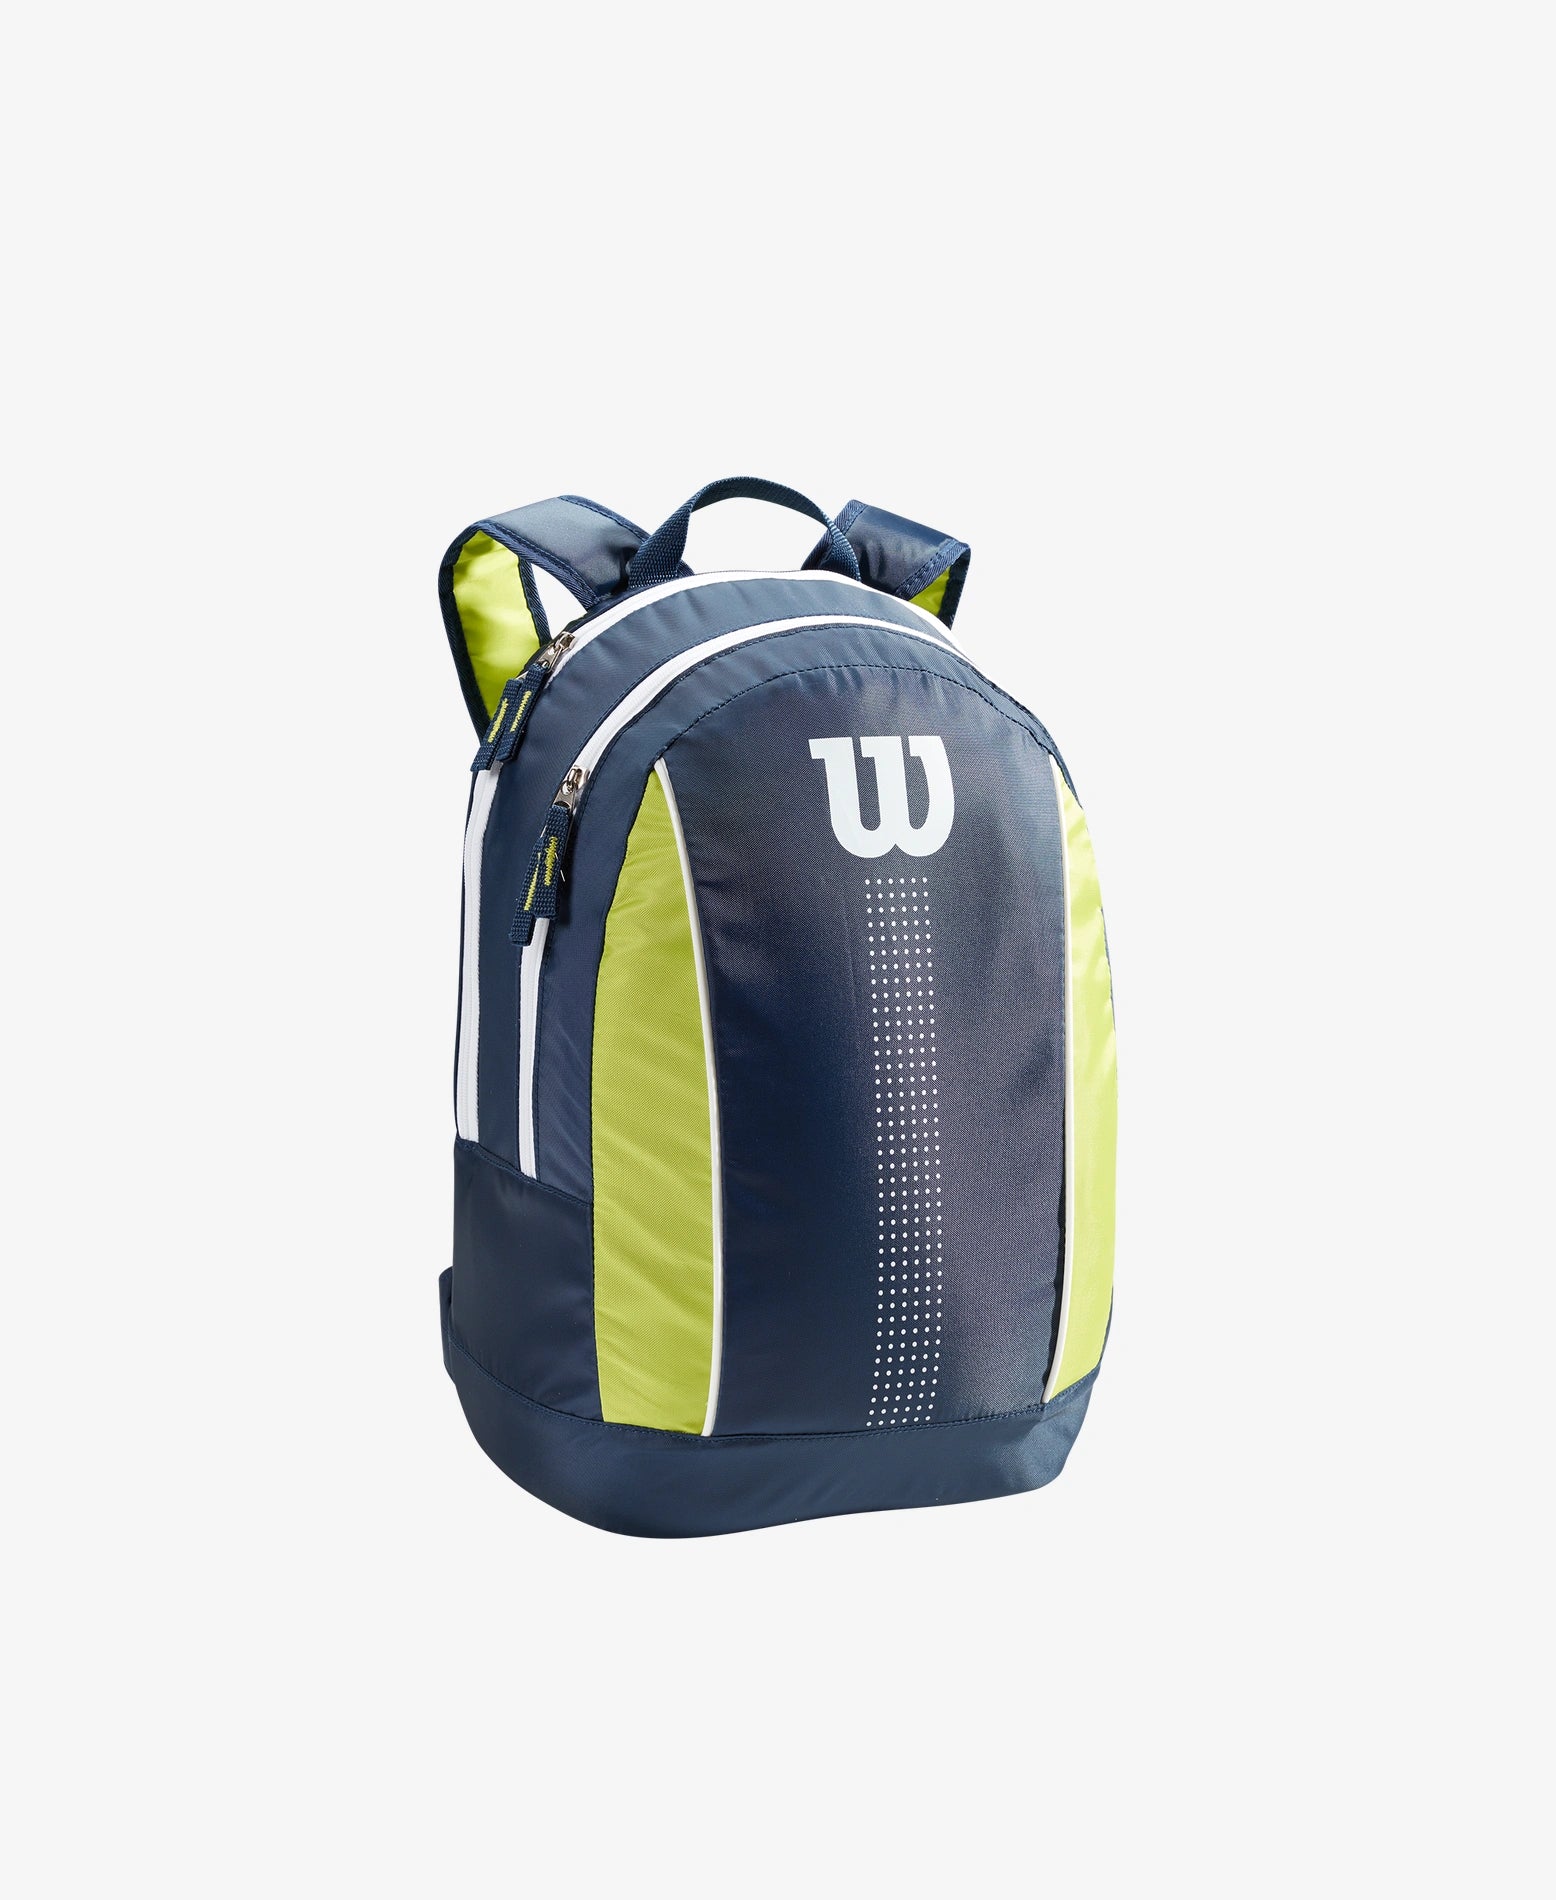 The Wilson Junior Backpack in navy and lime green available for sale at GSM Sports.